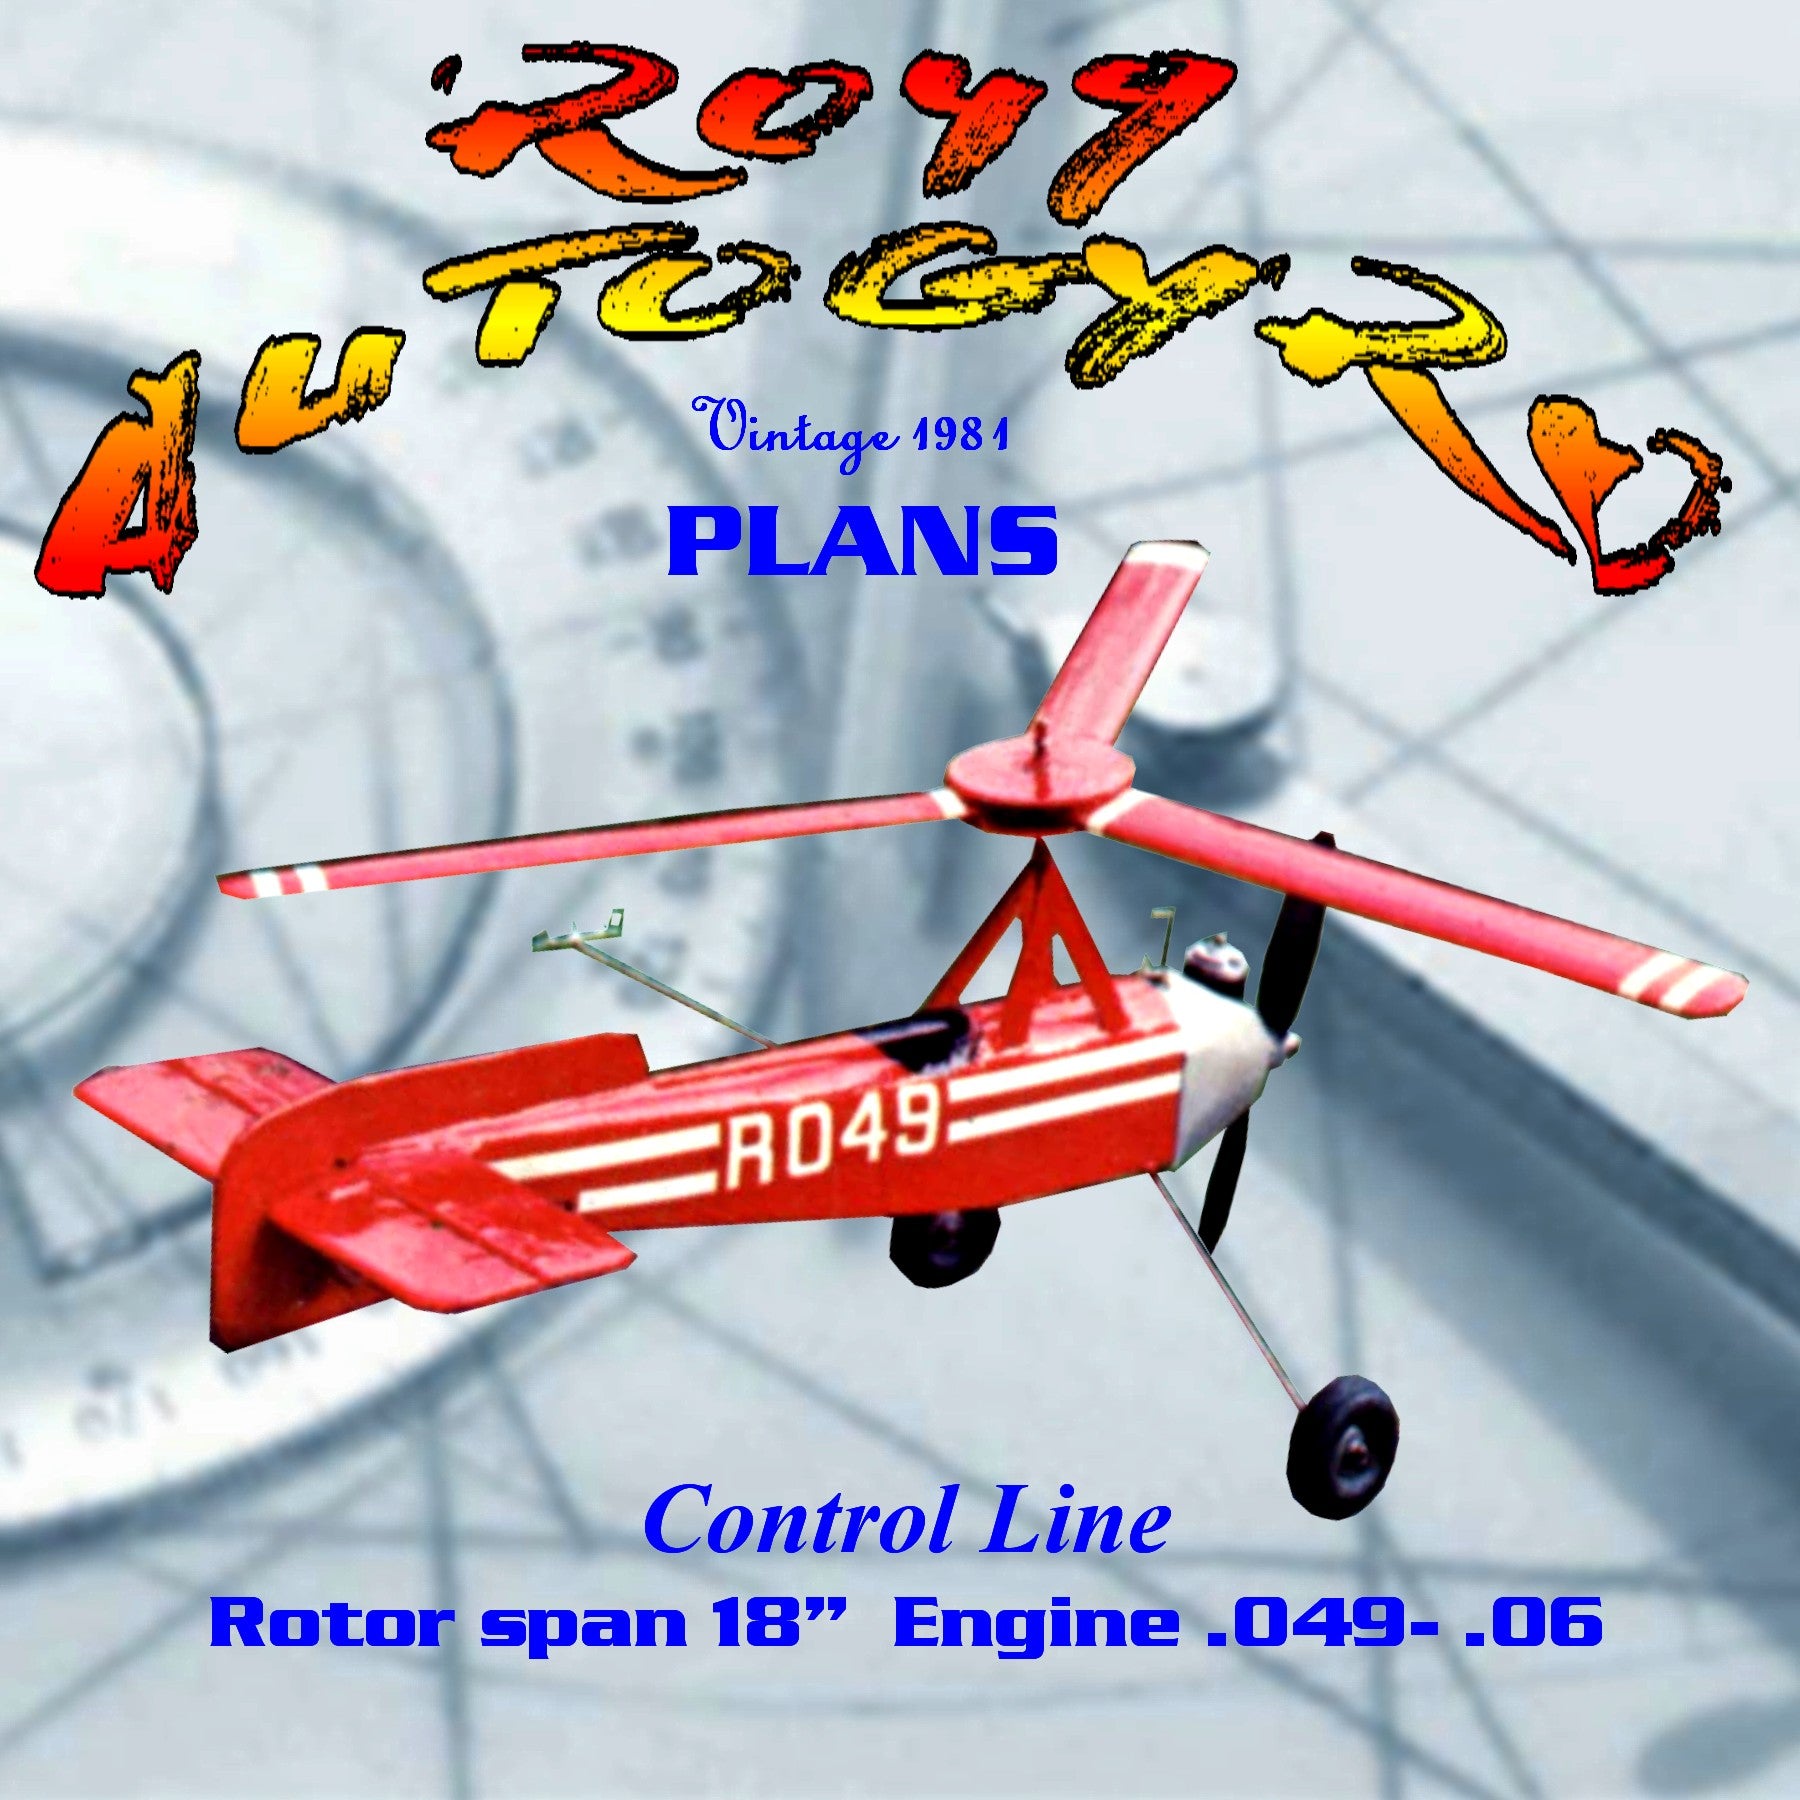 full size printed plan control line  r049 autogyro rotor span 18”   for.049 - .06